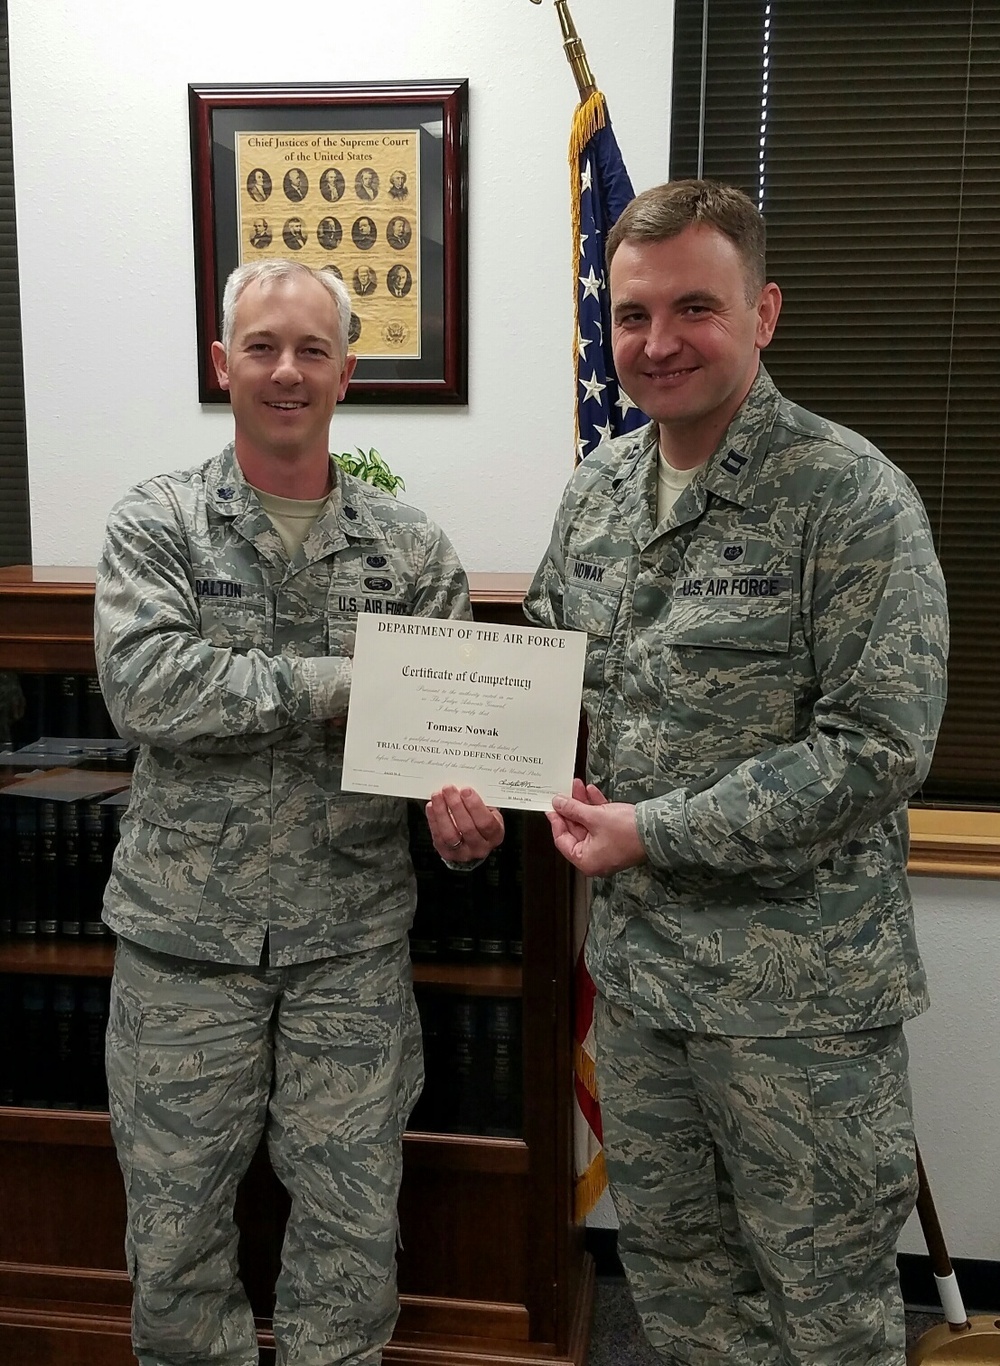 Lawyer finds path to service in Air Force Reserve